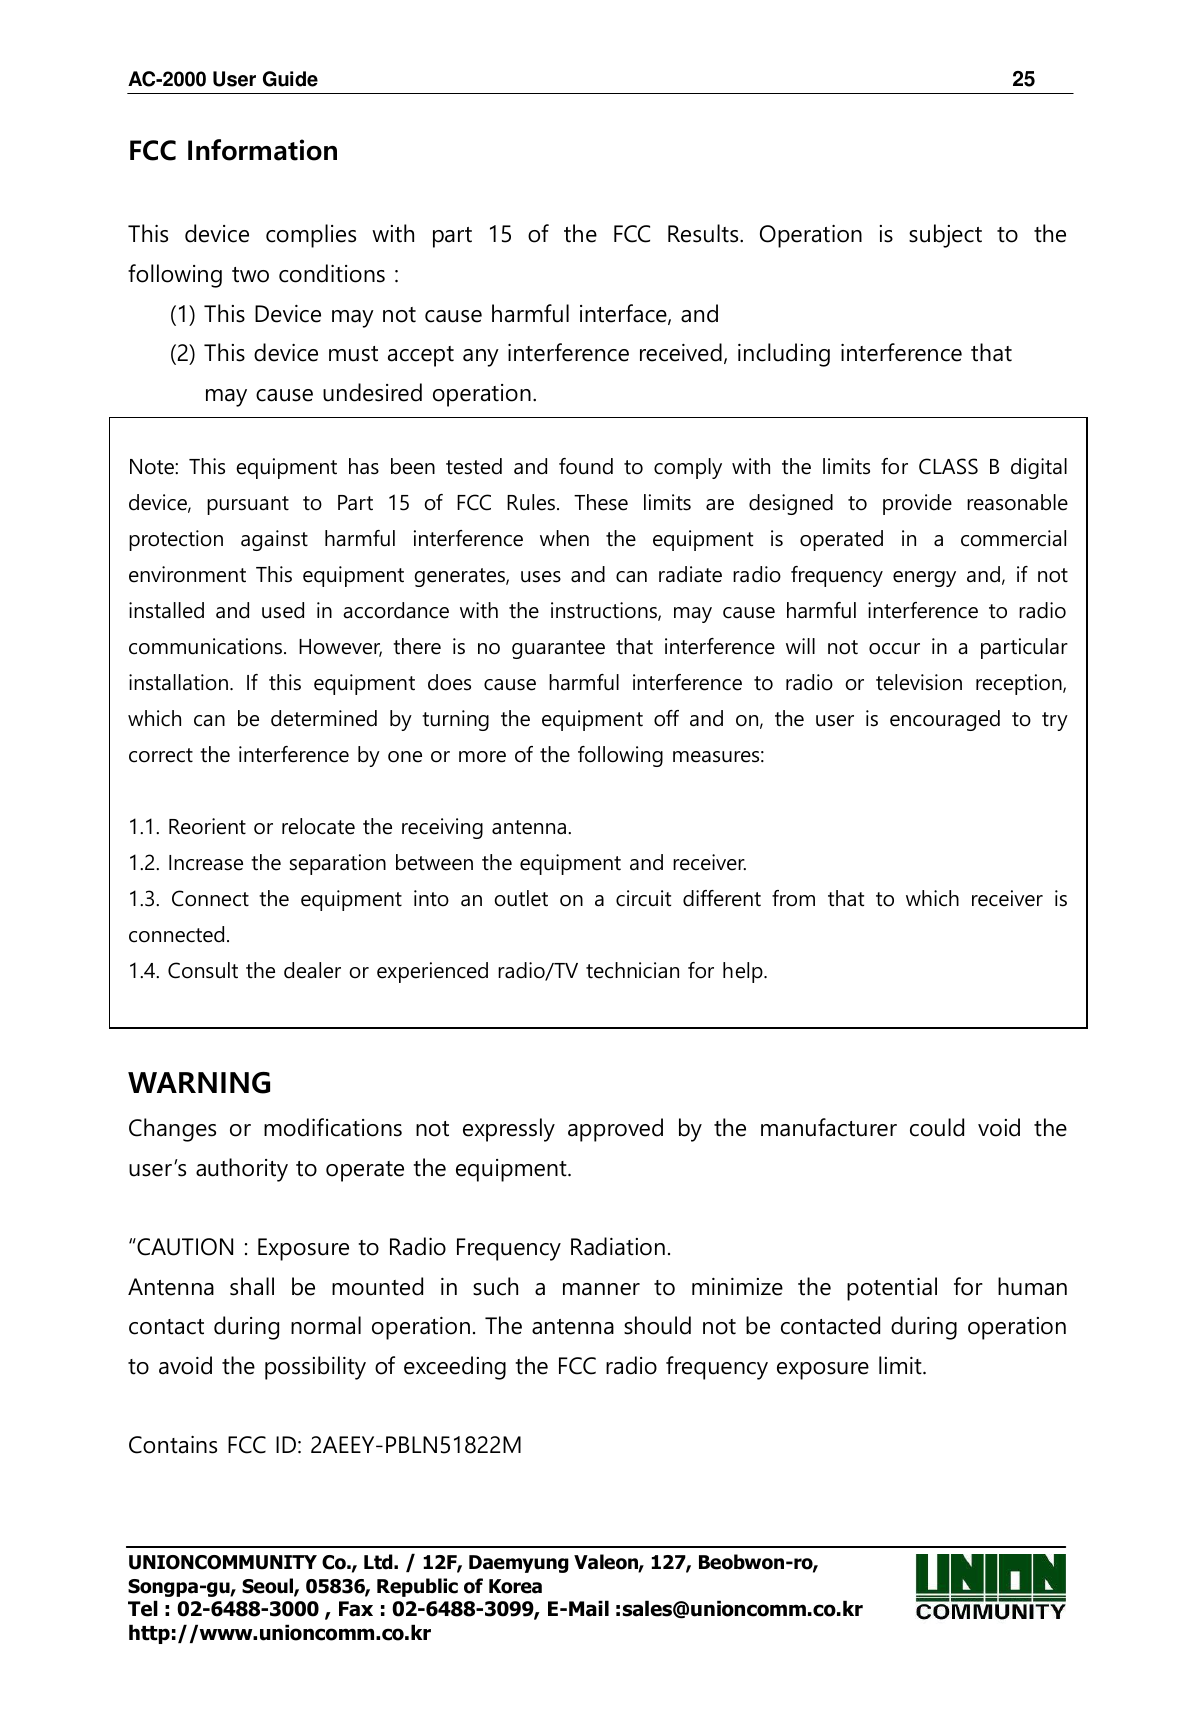 AC-2000 User Guide                                                                      25 UNIONCOMMUNITY Co., Ltd. / 12F, Daemyung Valeon, 127, Beobwon-ro, Songpa-gu, Seoul, 05836, Republic of Korea Tel : 02-6488-3000 , Fax : 02-6488-3099, E-Mail :sales@unioncomm.co.kr http://www.unioncomm.co.kr FCC Information    This  device  complies  with  part  15  of  the  FCC  Results.  Operation  is  subject  to  the following two conditions :   (1) This Device may not cause harmful interface, and     (2) This device must accept any interference received, including interference that       may cause undesired operation.    Note: This equipment has been tested and found to comply with the limits for  CLASS B  digital device,  pursuant  to  Part  15  of  FCC  Rules.  These  limits  are  designed  to  provide  reasonable protection  against  harmful  interference  when  the  equipment  is  operated  in  a  commercial environment This equipment generates, uses and can radiate radio frequency energy and, if not installed and  used in accordance with  the  instructions, may cause harmful interference to  radio communications.  However,  there  is  no guarantee  that  interference  will  not occur in a  particular installation.  If  this  equipment  does  cause  harmful  interference  to  radio  or  television  reception, which  can  be  determined  by  turning the  equipment  off  and  on,  the  user  is encouraged to  try correct the interference by one or more of the following measures:    1.1. Reorient or relocate the receiving antenna. 1.2. Increase the separation between the equipment and receiver. 1.3.  Connect  the  equipment  into  an  outlet  on  a  circuit  different  from  that  to  which  receiver  is connected. 1.4. Consult the dealer or experienced radio/TV technician for help.   WARNING Changes  or  modifications  not  expressly  approved  by  the  manufacturer  could  void  the user’s authority to operate the equipment.  “CAUTION : Exposure to Radio Frequency Radiation. Antenna  shall  be  mounted  in  such  a  manner  to  minimize  the  potential  for  human contact during normal operation. The antenna should not be contacted during operation to avoid the possibility of exceeding the FCC radio frequency exposure limit.  Contains FCC ID: 2AEEY-PBLN51822M  